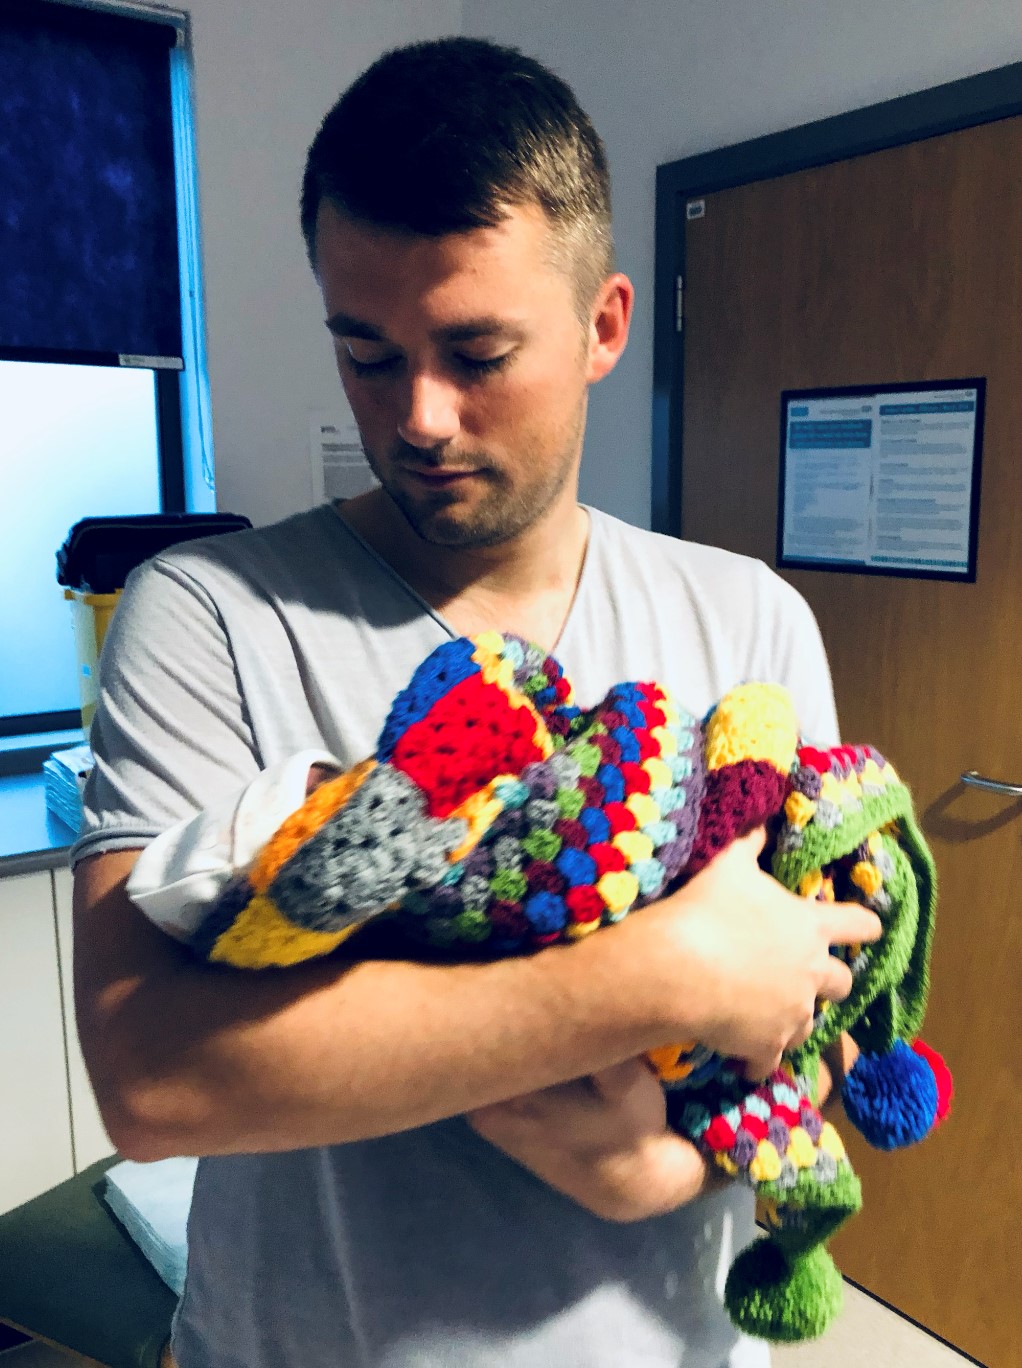 Ross holds his stillborn son Leo, who is wrapped in a colourful homemade blanket